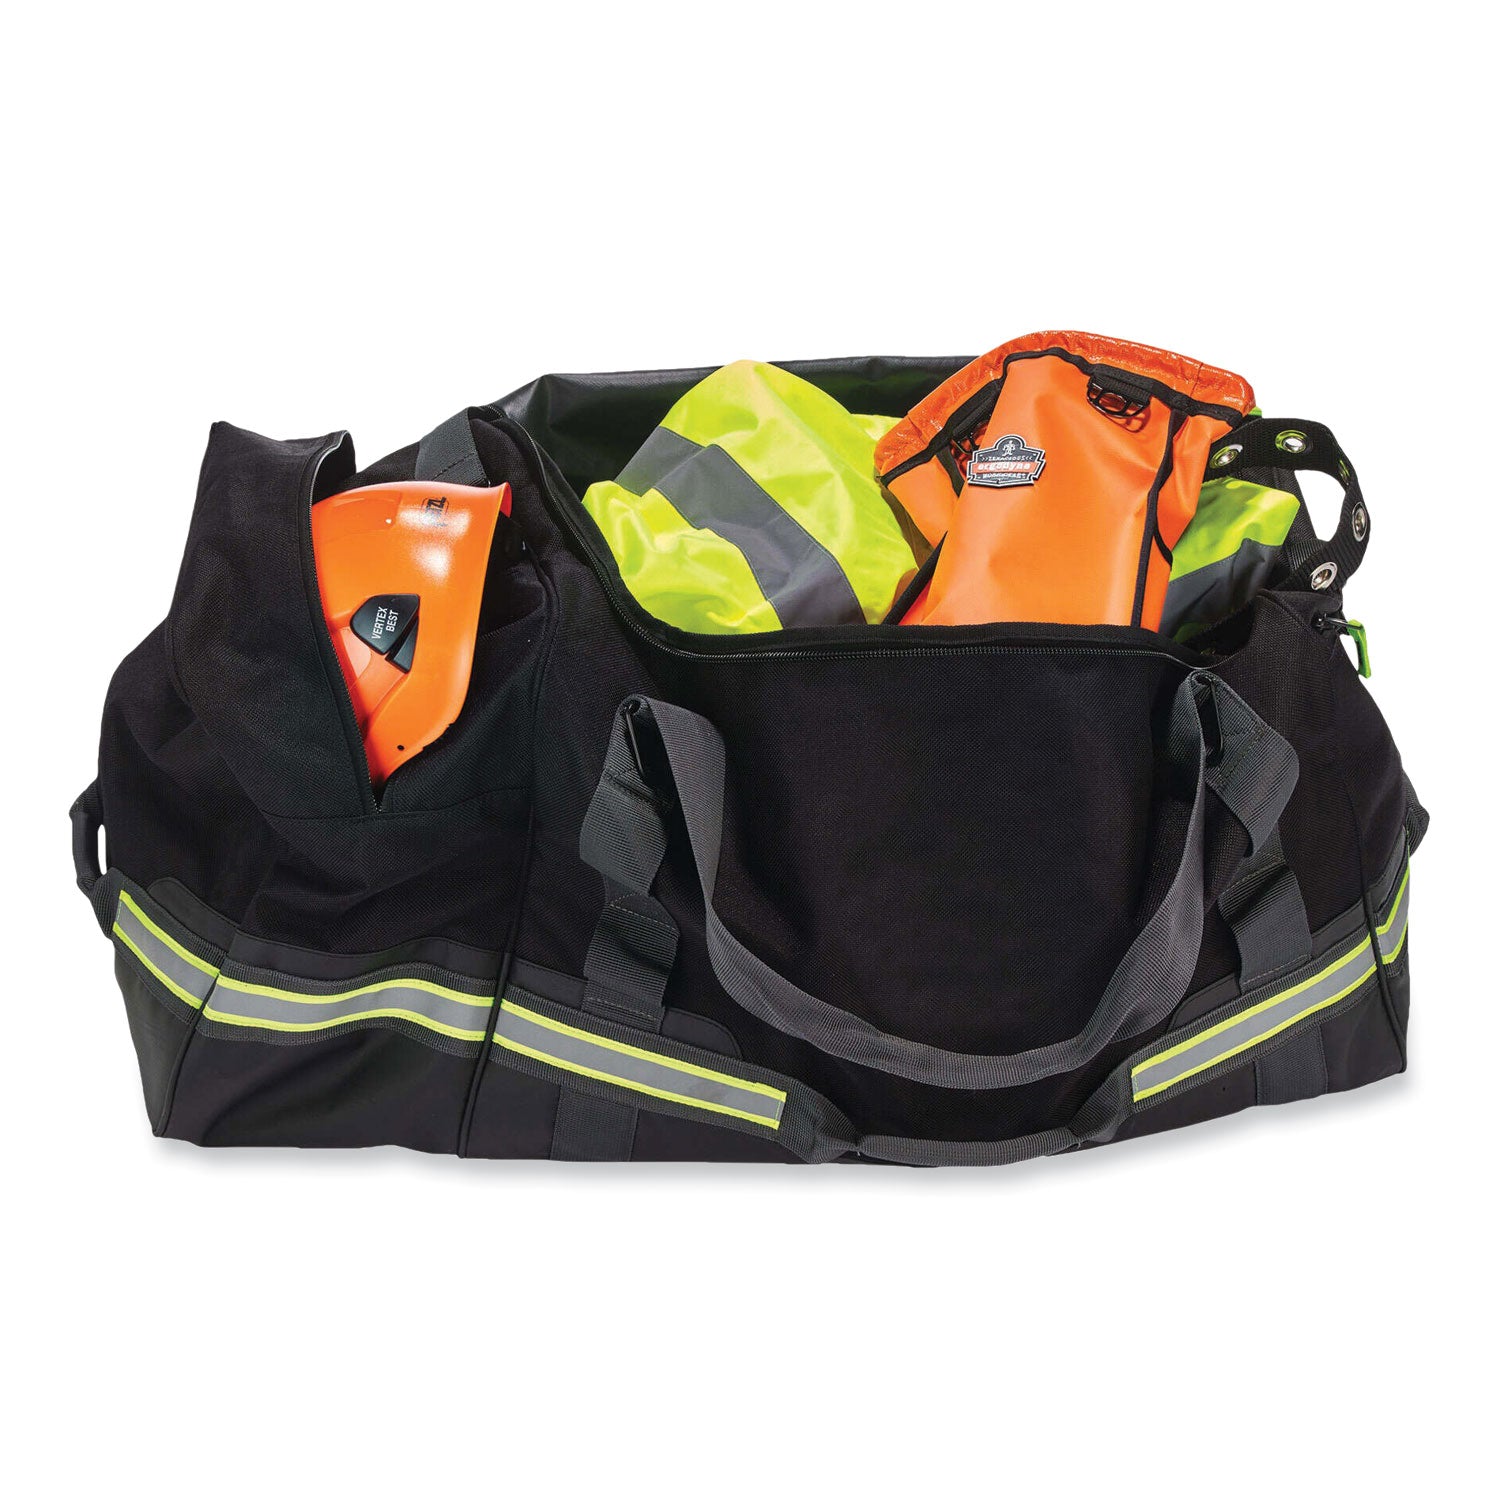 arsenal-5008-fire-+-safety-gear-bag-16-x-31-x-155-black-ships-in-1-3-business-days_ego13009 - 4